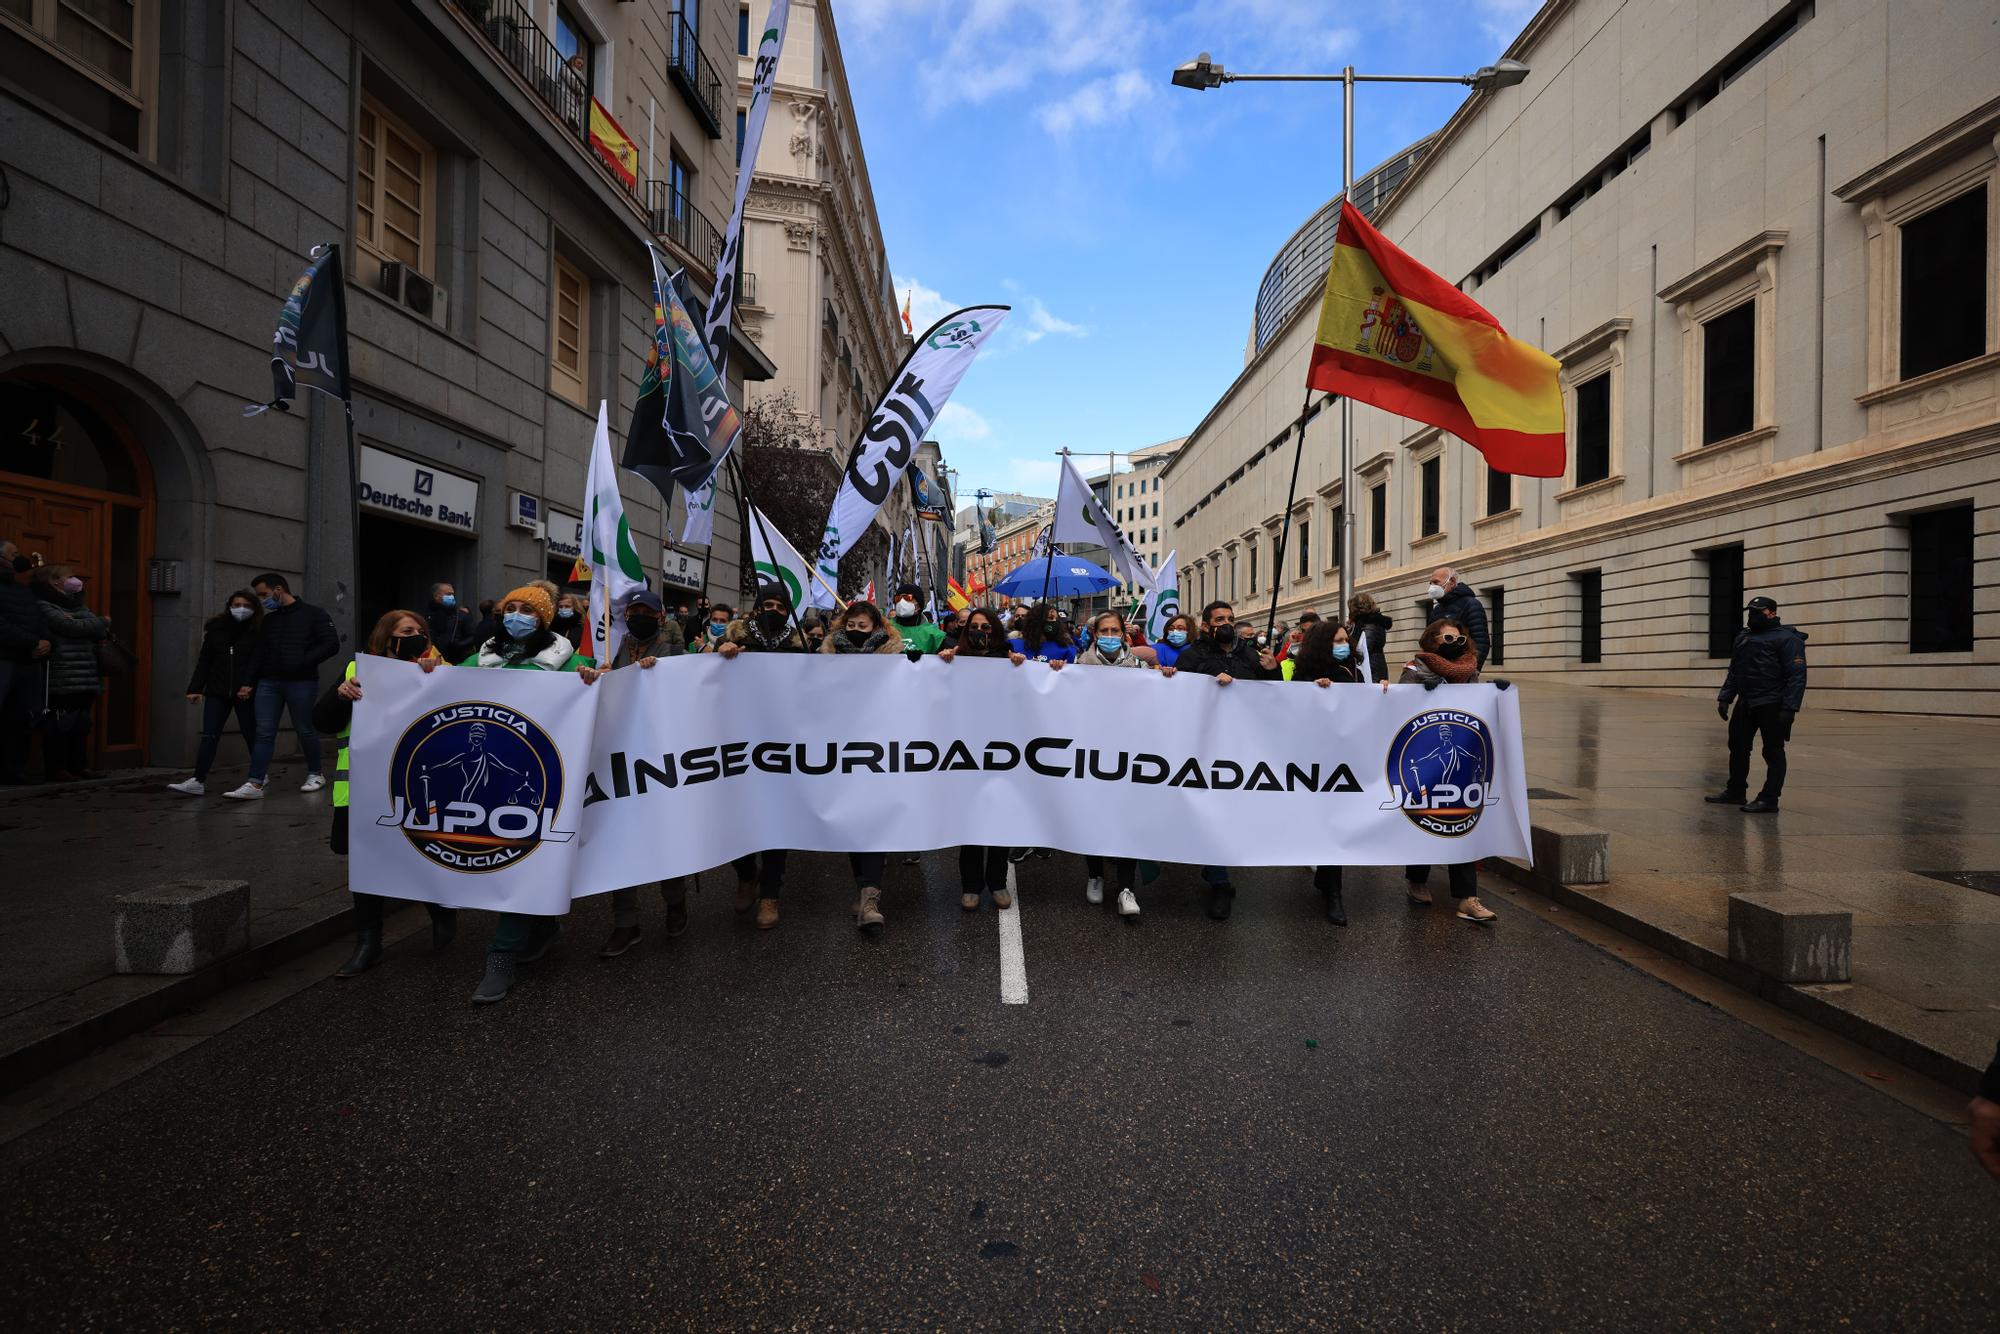 Representation of police and civil guards from Alicante in the demonstration against the 